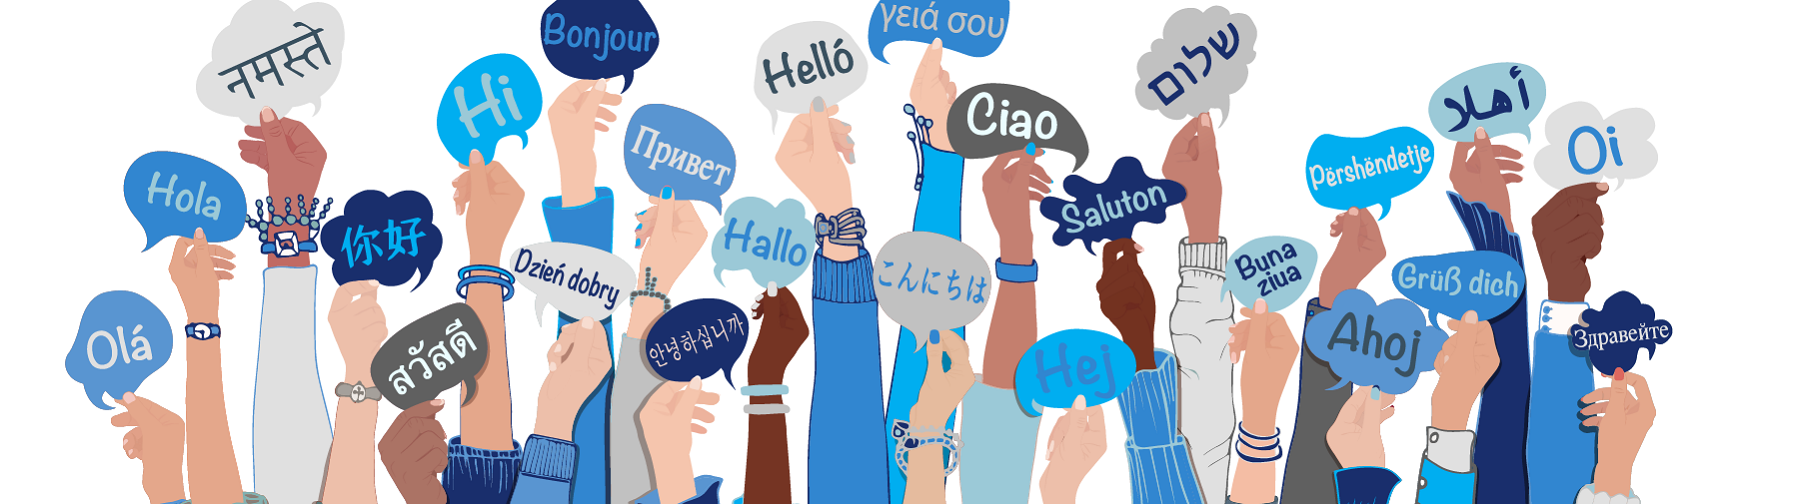 hands holding word bubbles with translations of hello in world languages